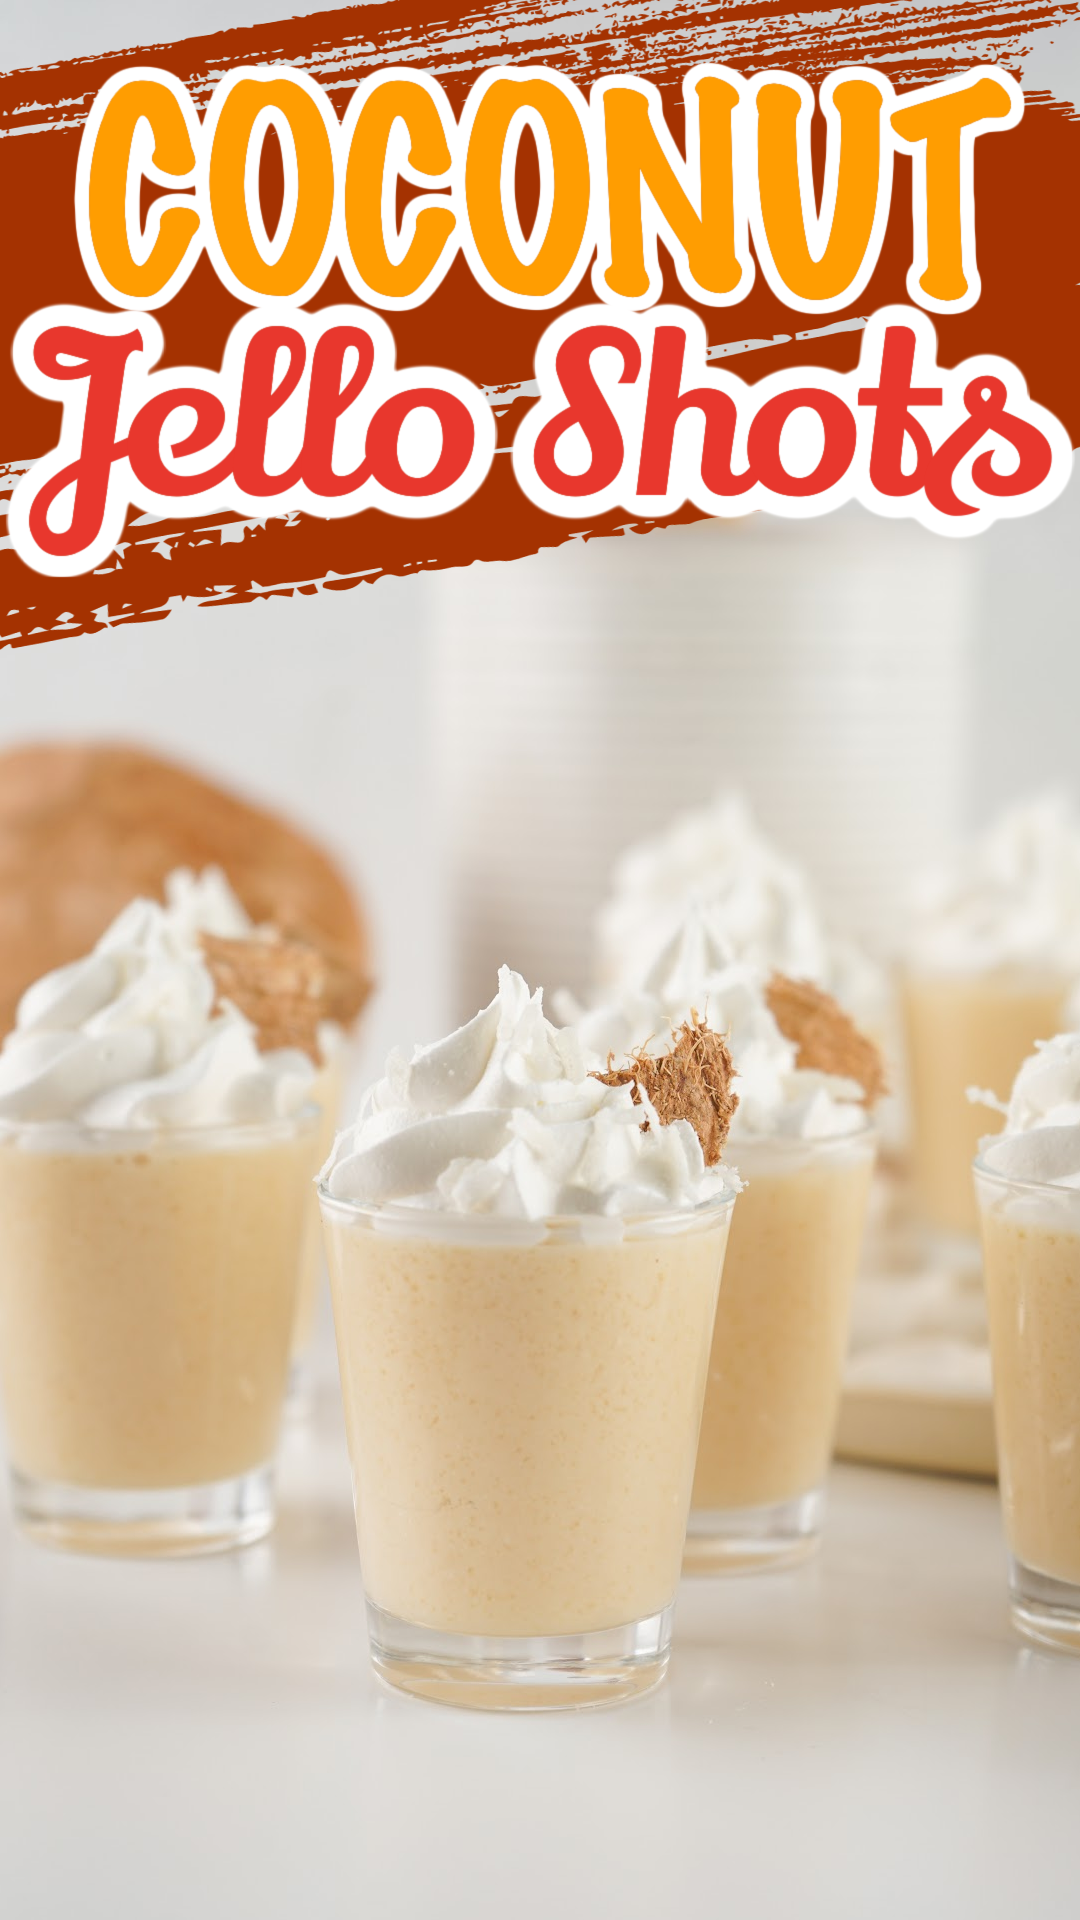 Coconut jello shots topped with whipped cream in tall shot glasses. pin image